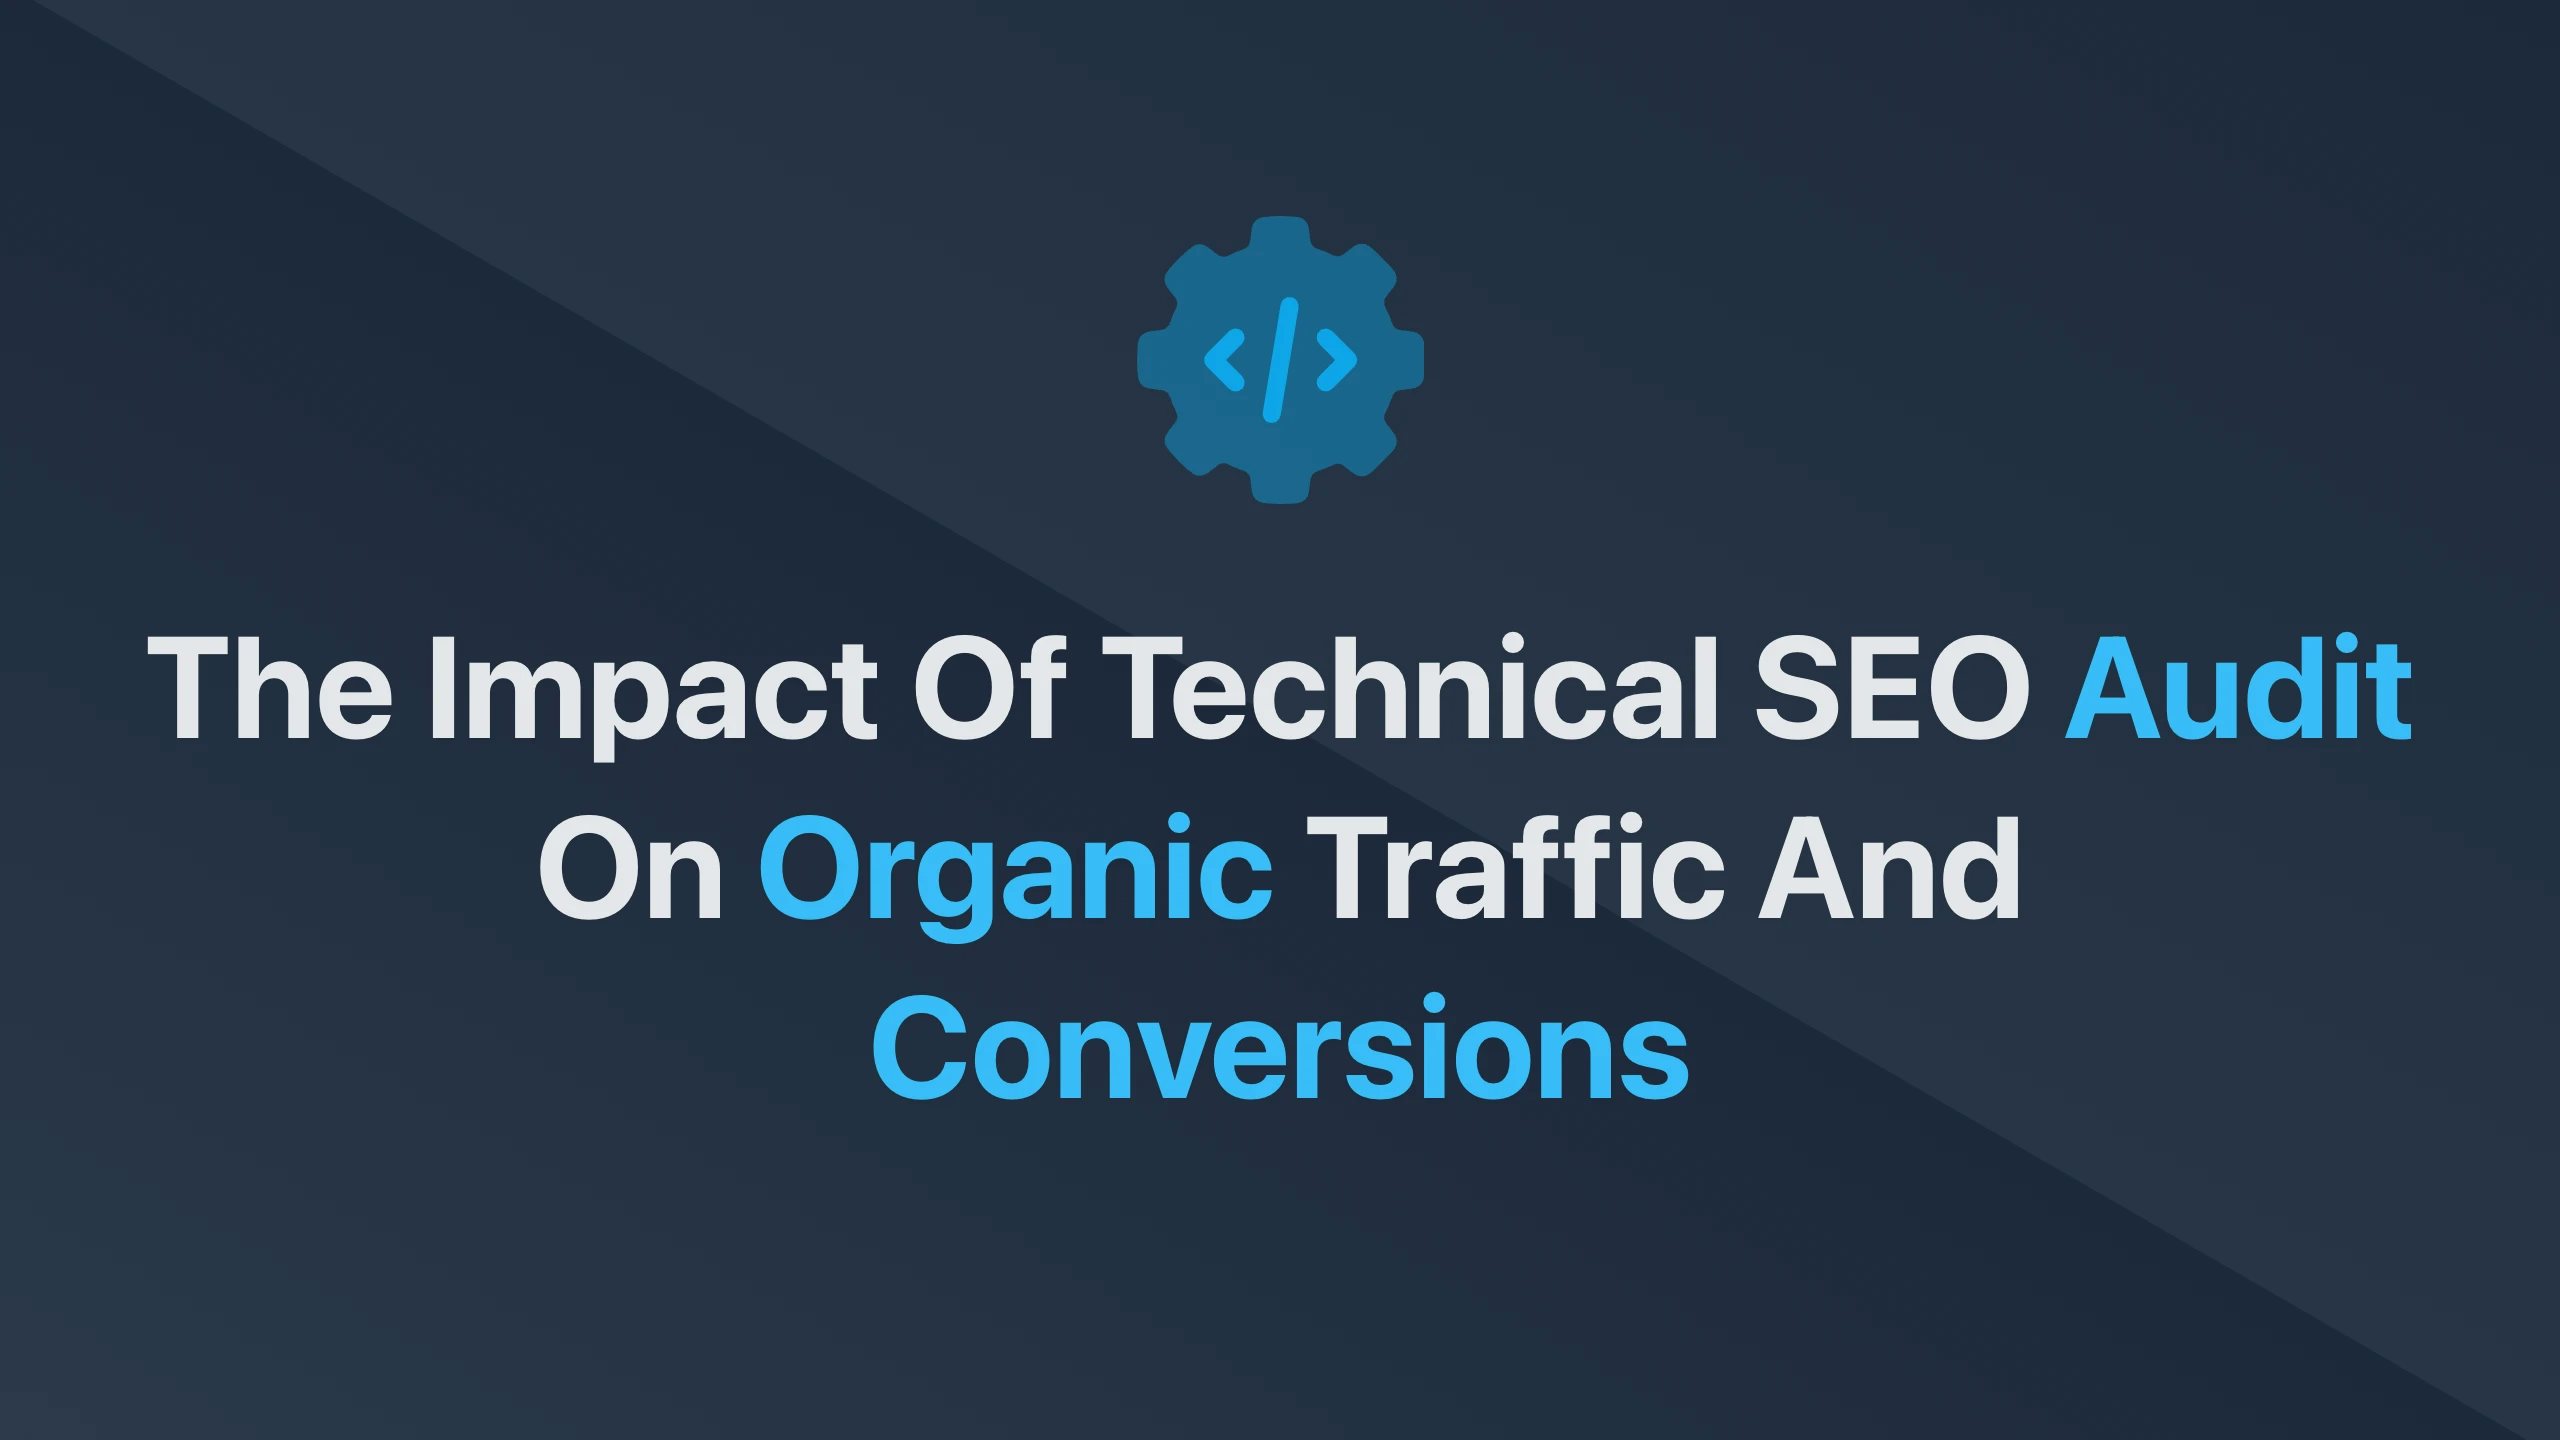 Cover Image for The Impact of Technical SEO Audit on Organic Traffic and Conversions